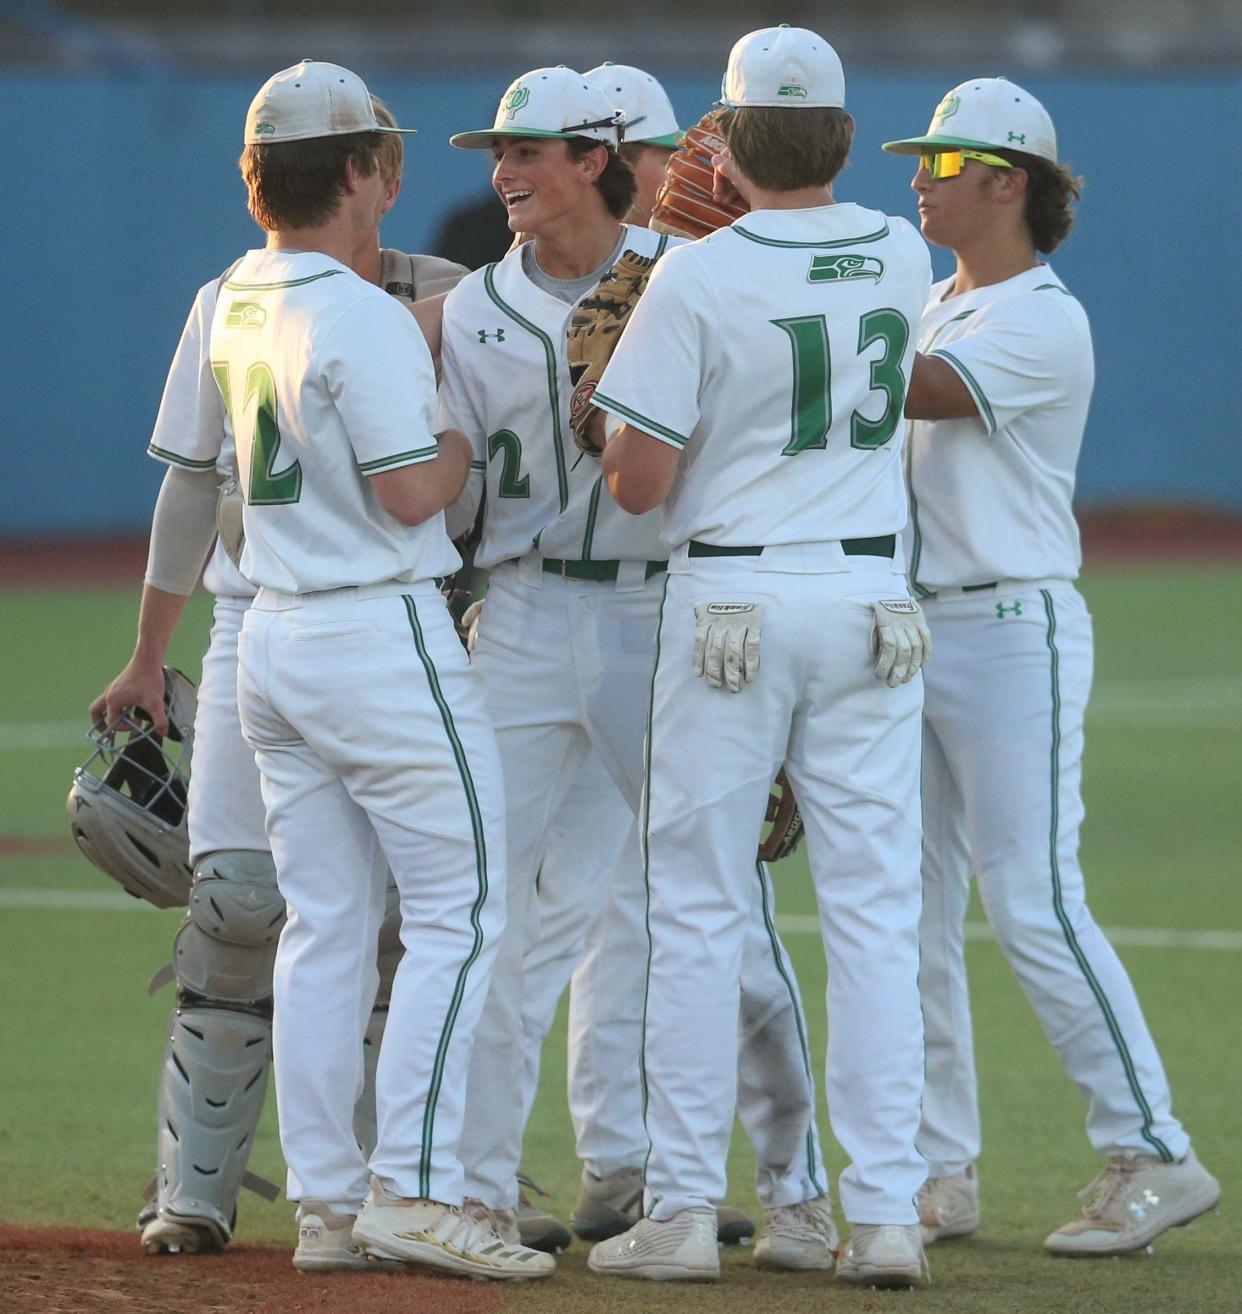 The Wall High School baseball team keeps things light during the District 6-3A championship against Jim Ned at Angelo State's Foster Field at 1st Community Credit Union Stadium on Monday, May 2, 2022.